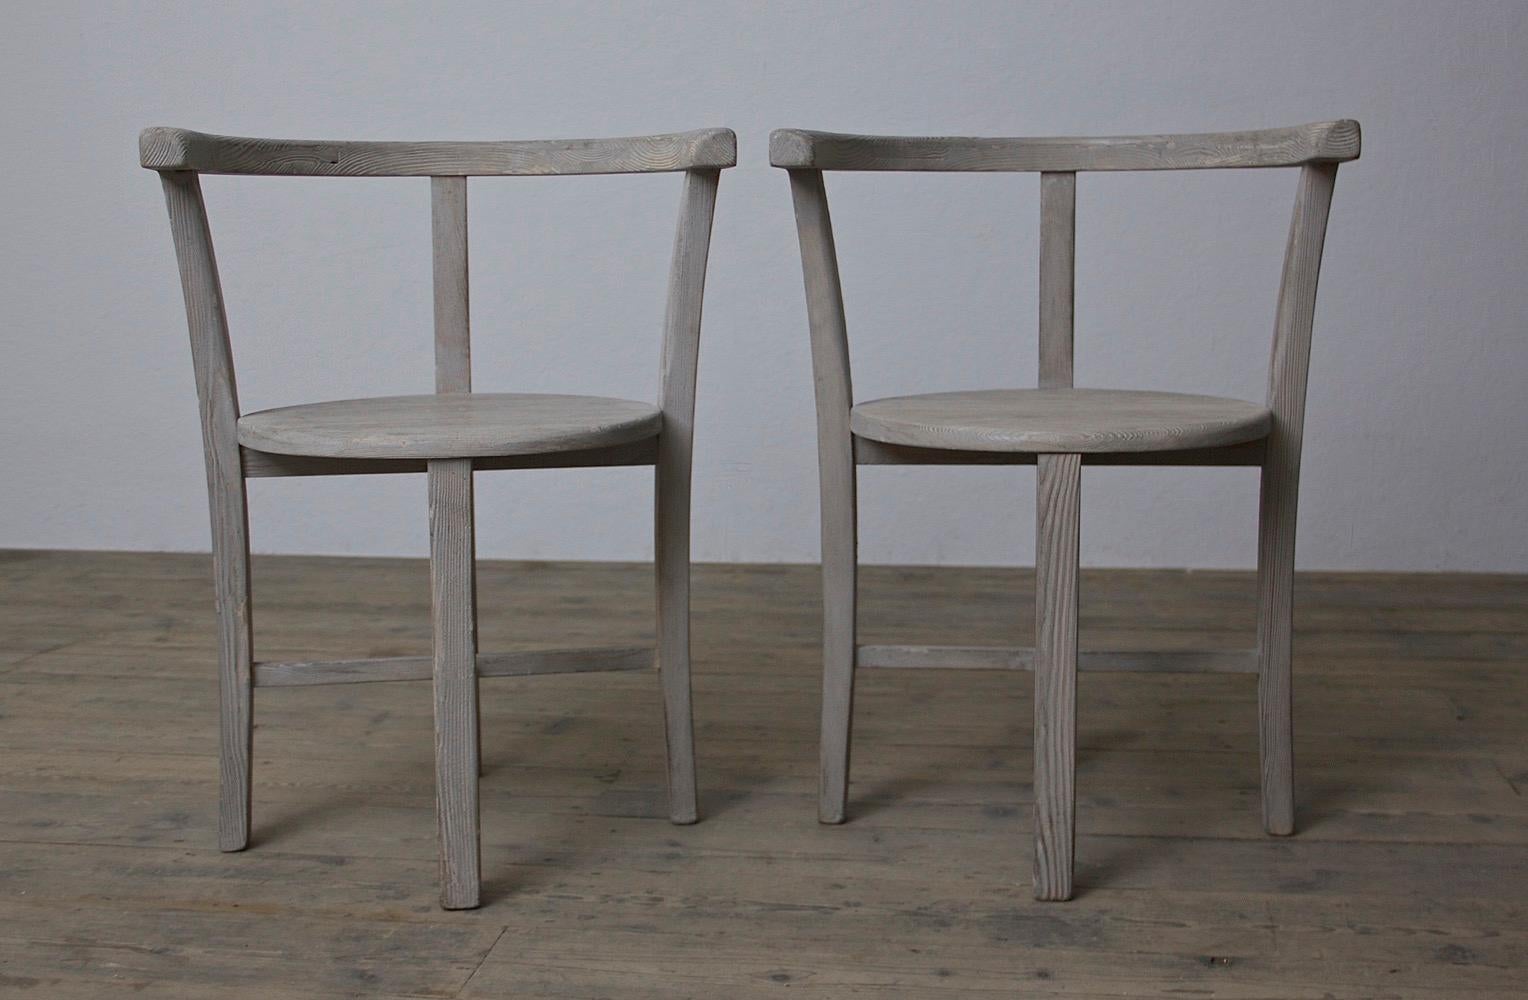 Contemporary Artist's Chair – an elegant, pared back dining chair For Sale